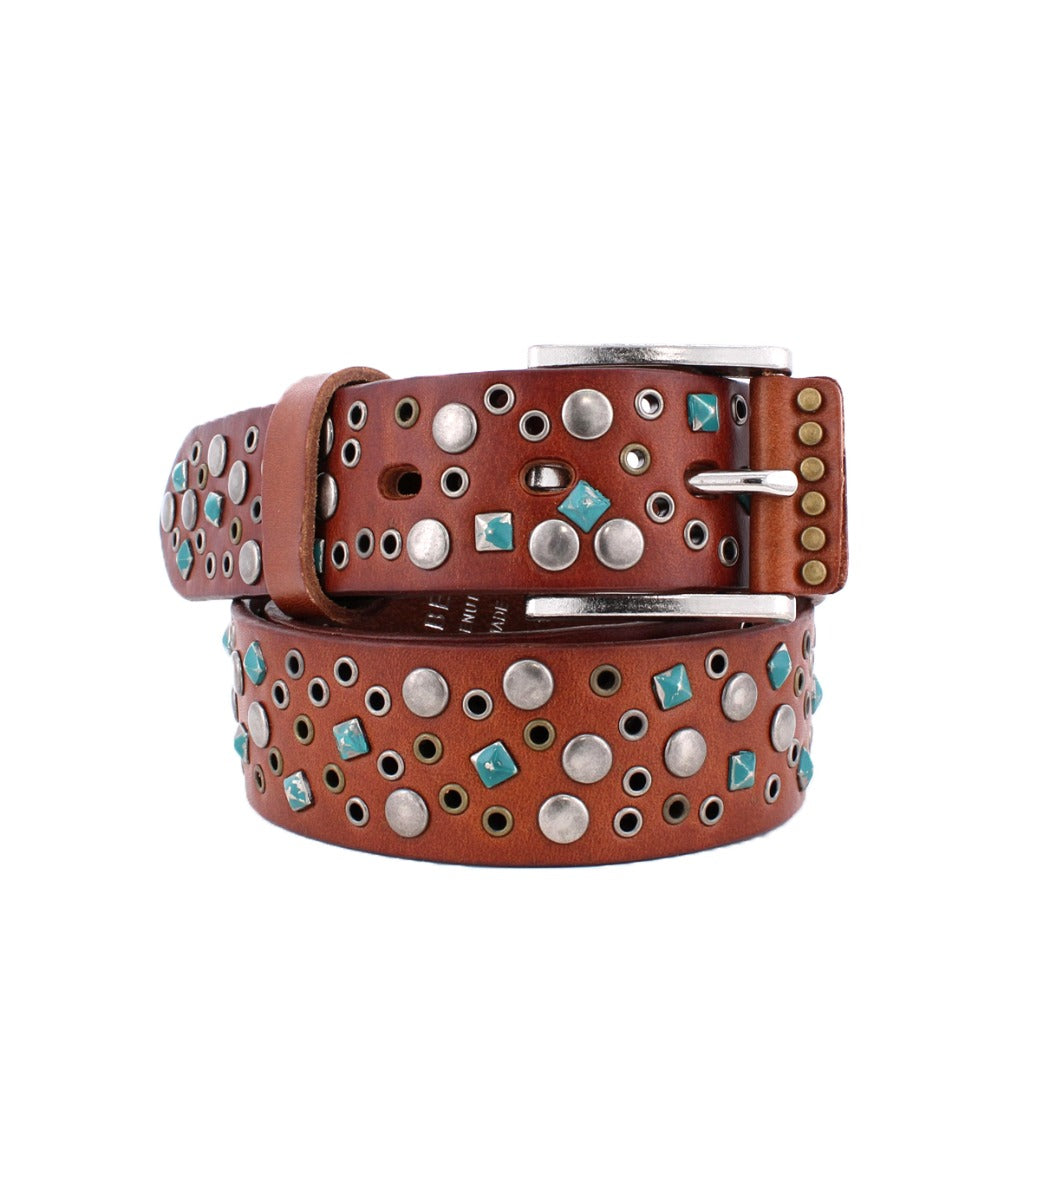 A Tammin II belt by Bed Stu with turquoise studded accents.